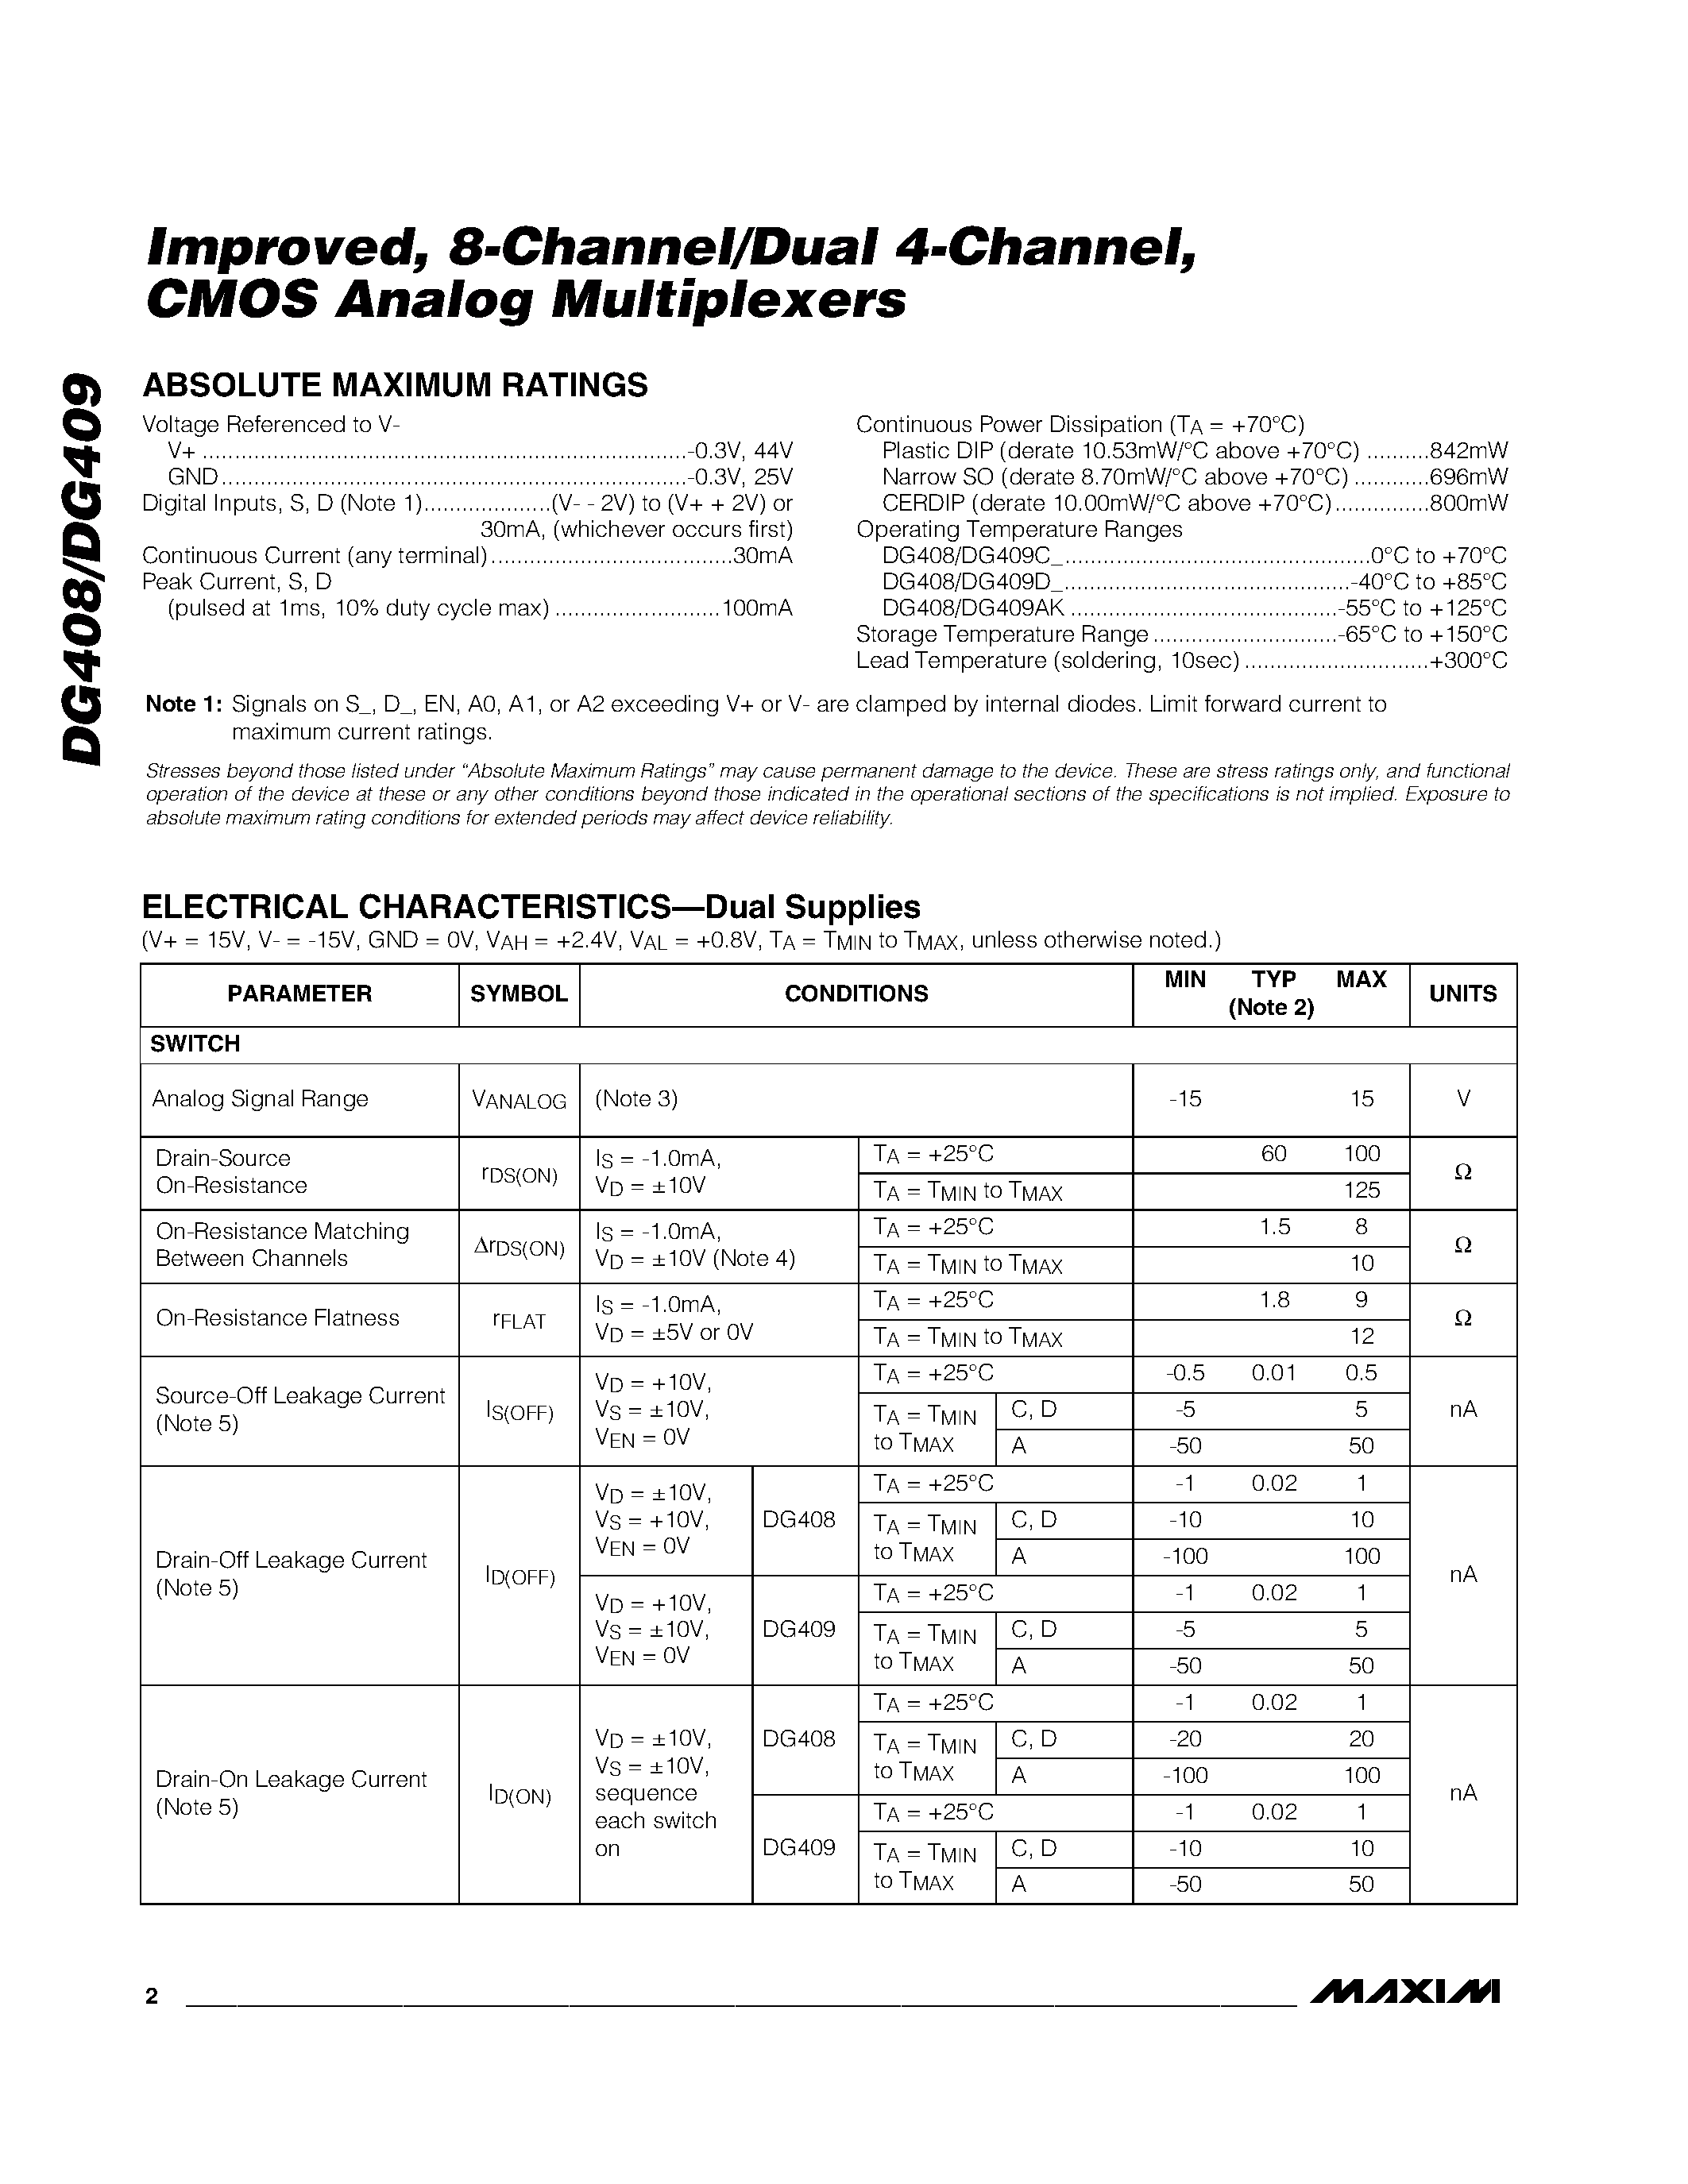 Datasheet DG408C/D - iMPROVED / 8-cHANNEL/dUAL 4-cHANNEL / cmos aNALOG mULTIPLEXERS page 2